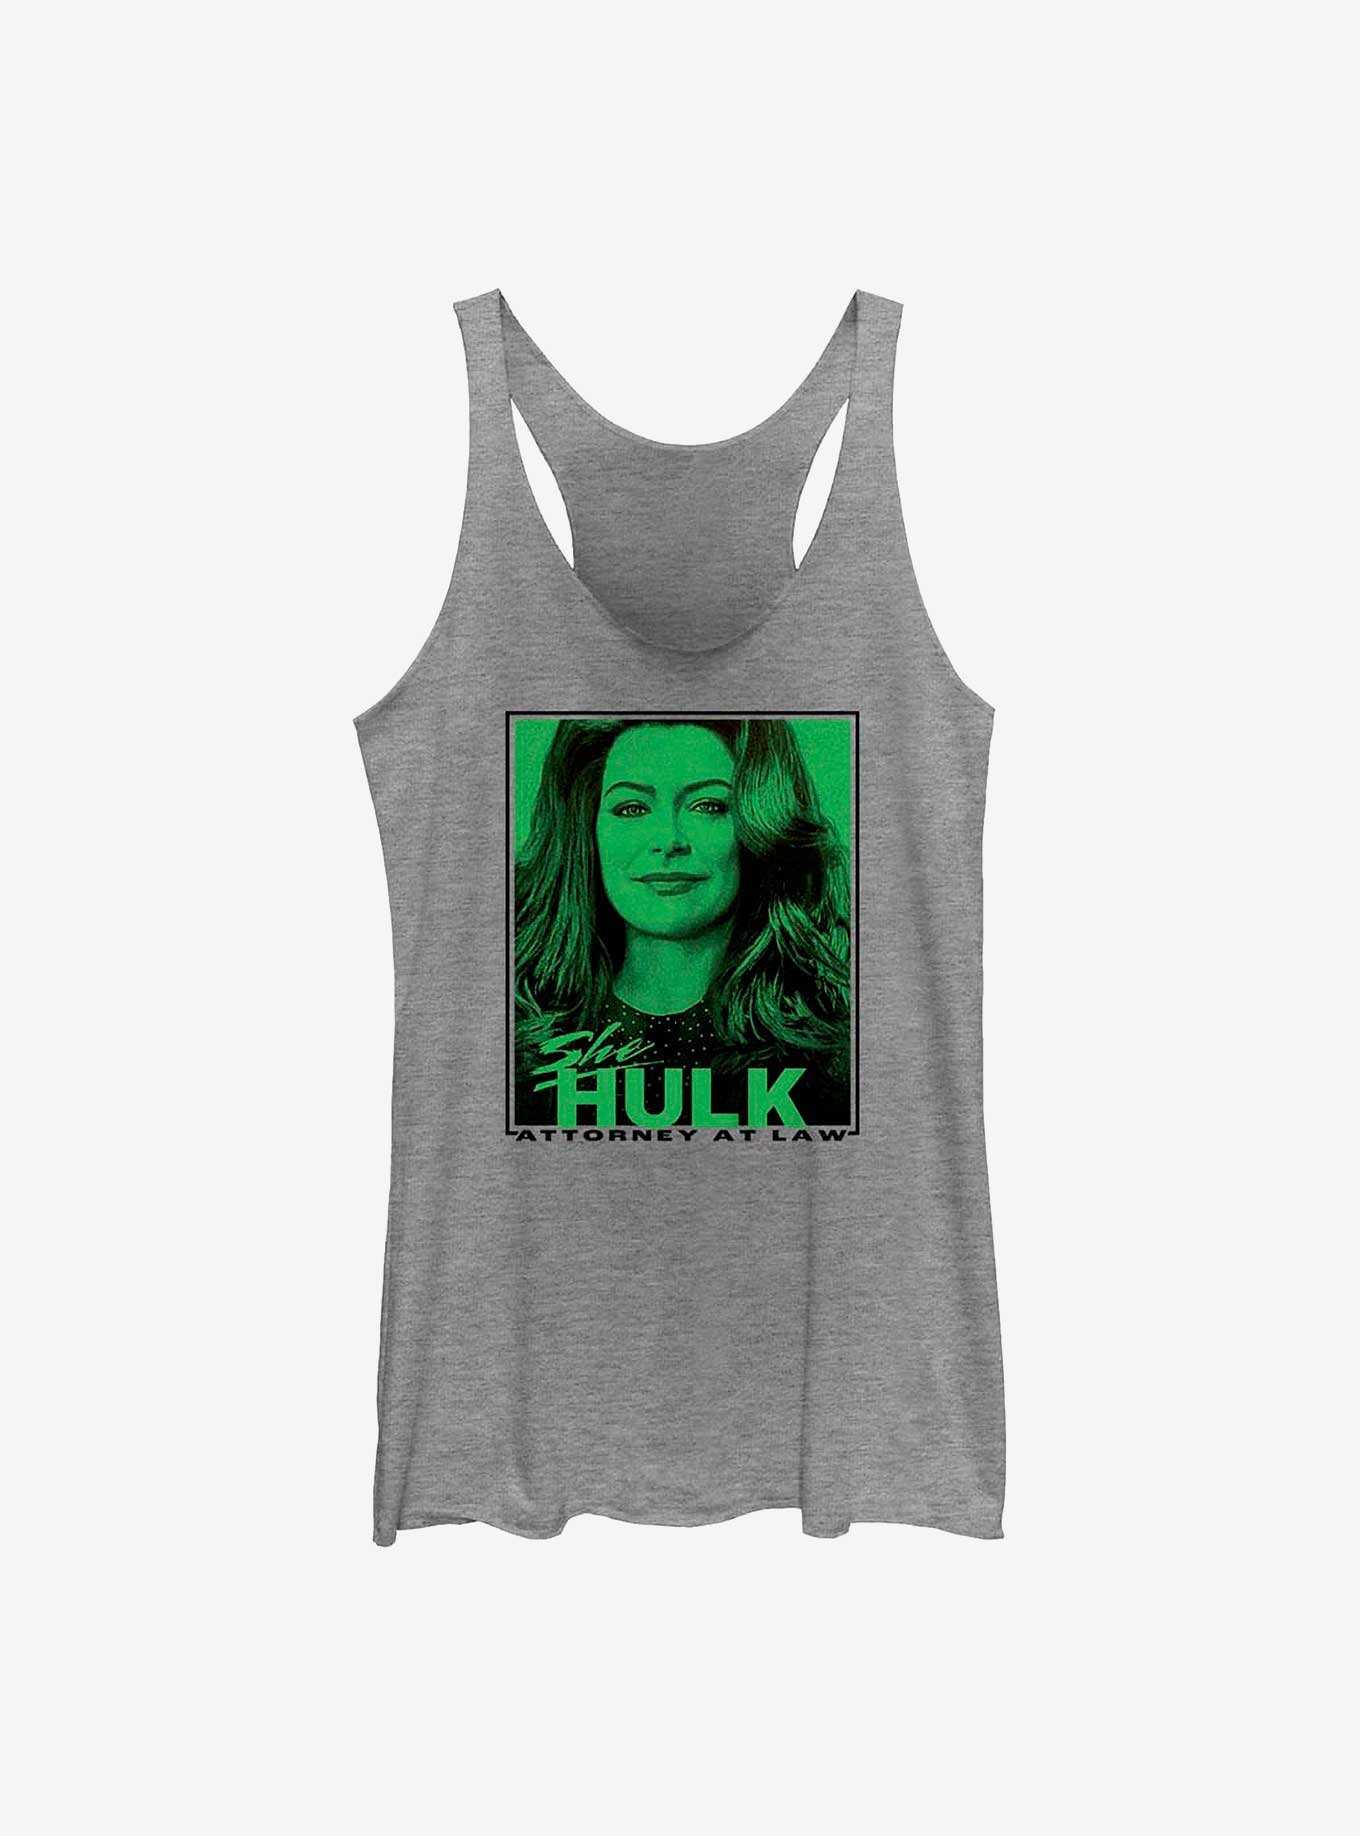 Marvel She-Hulk Attorney At Law Poster Portrait Womens Tank Top, , hi-res